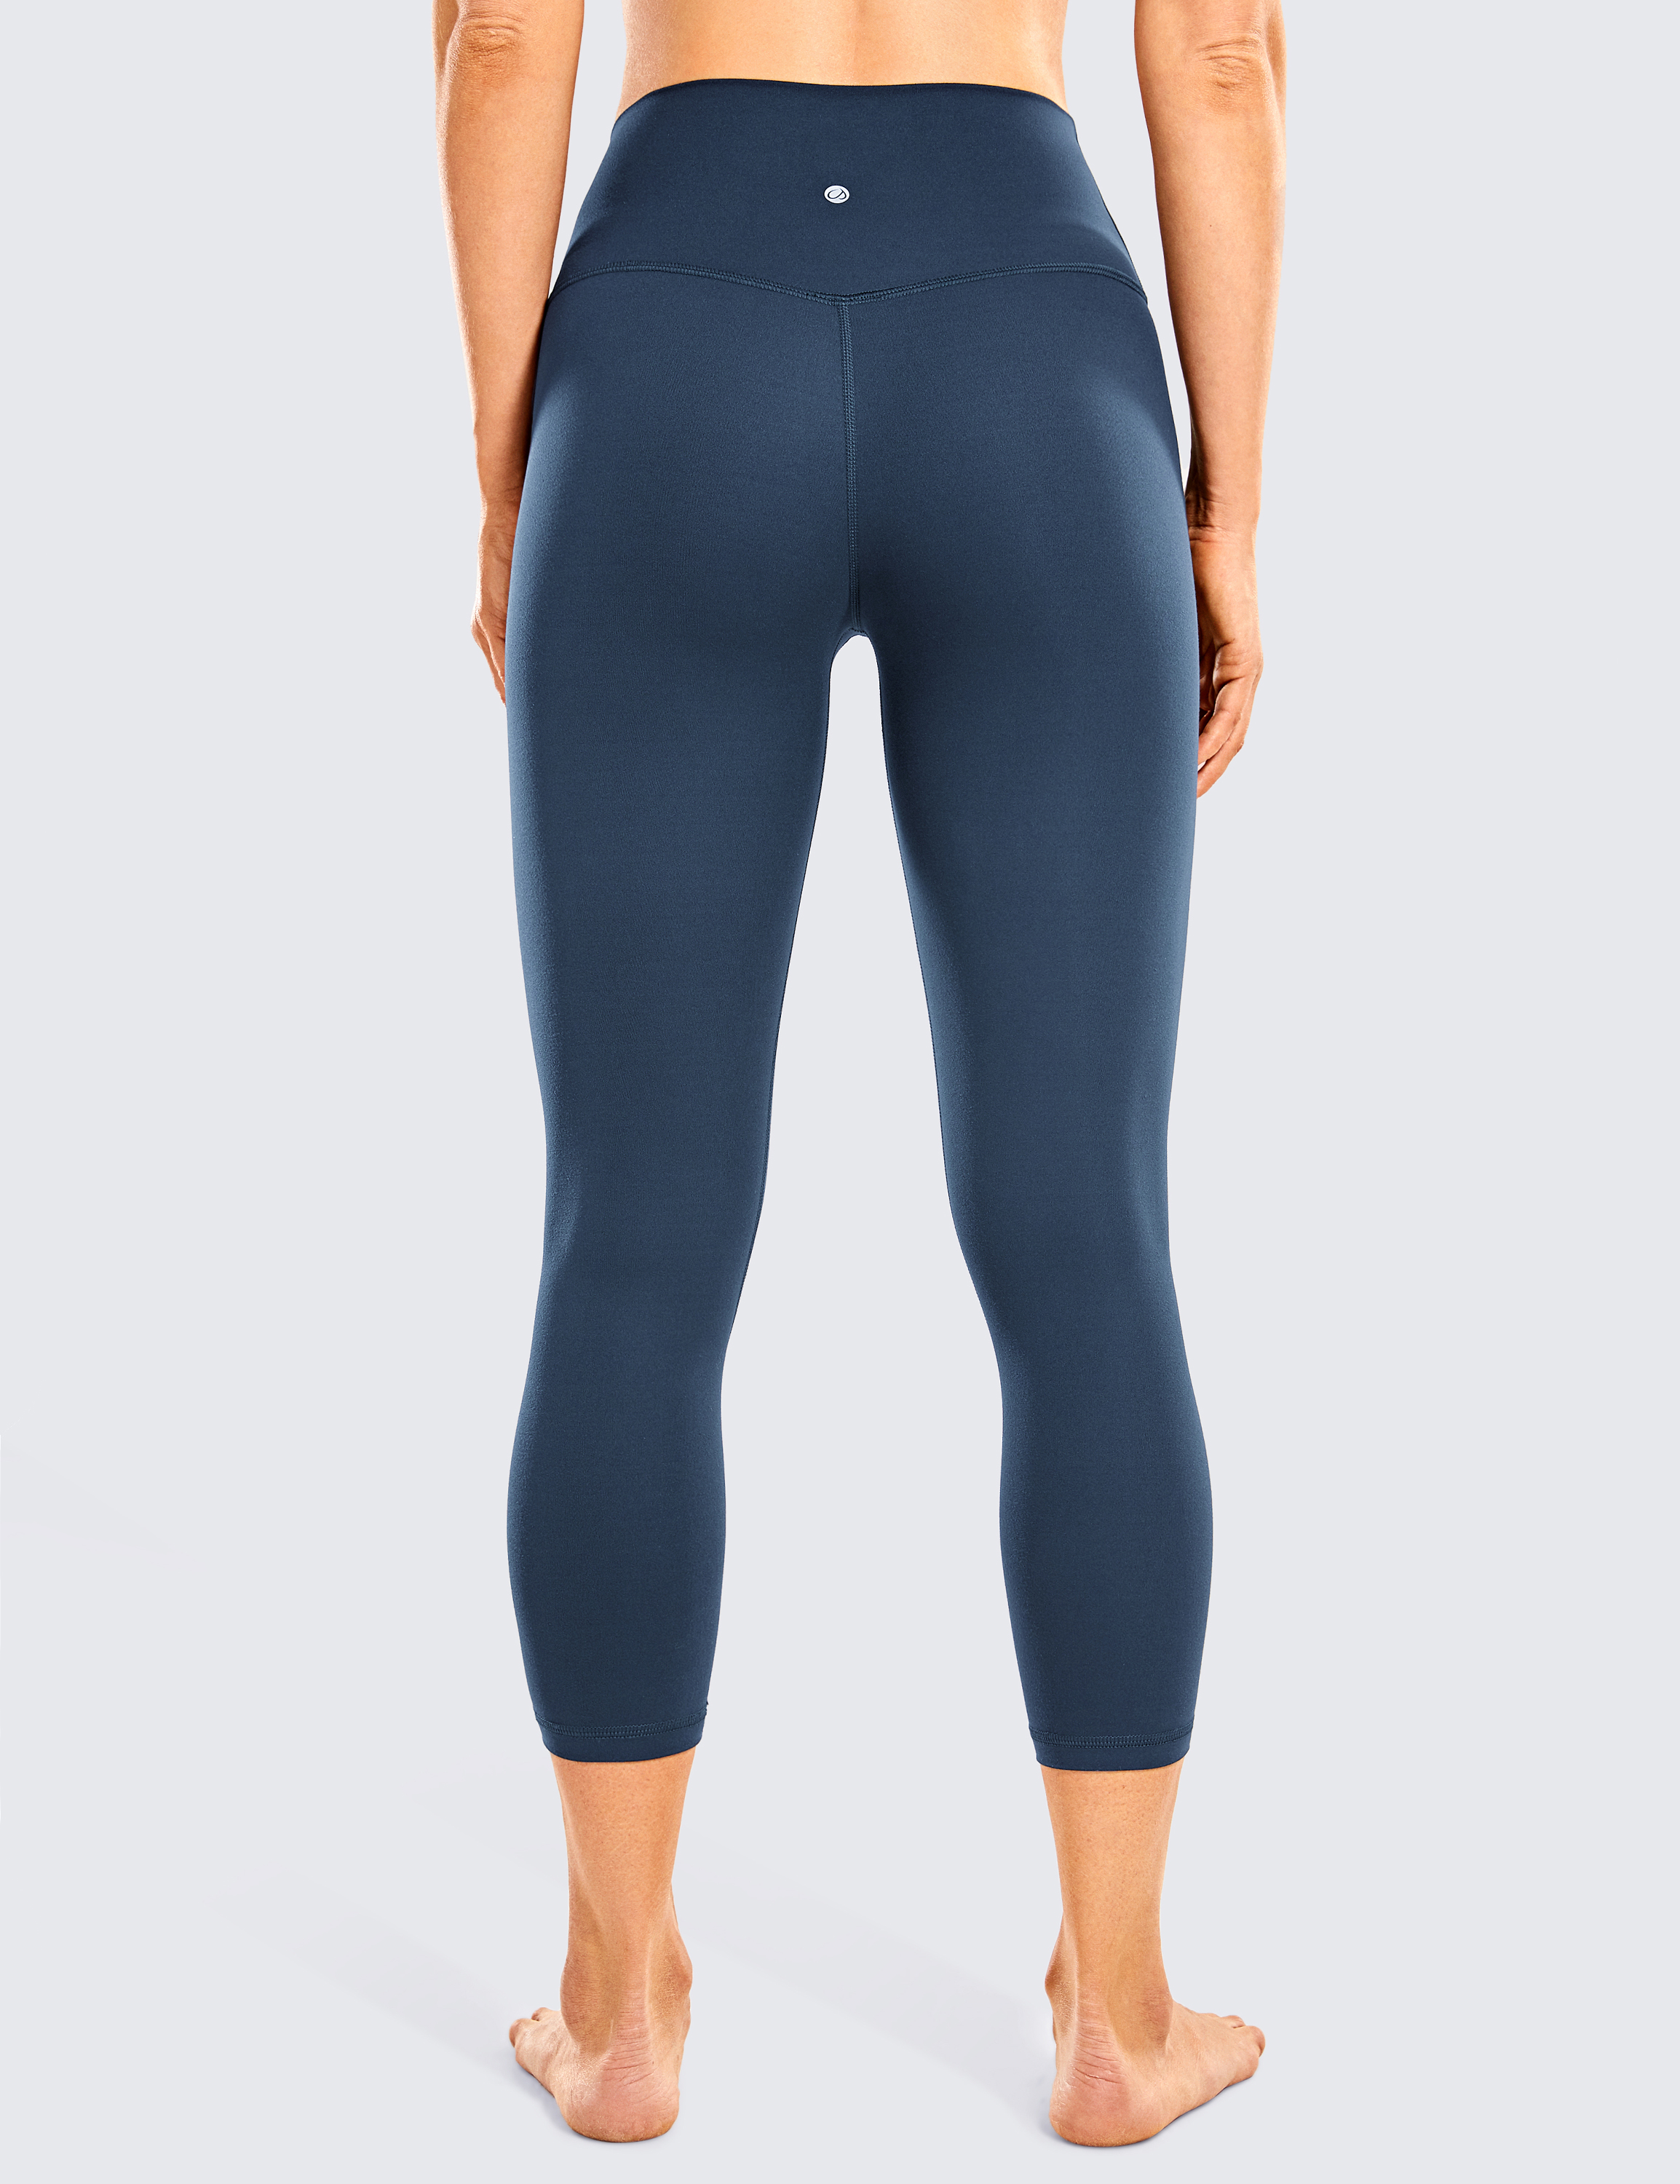 CRZ YOGA Women's Naked Feeling Workout Leggings 19 Inches - High Waist Gym  Capris Leggings with Pockets Moonphase M price in UAE,  UAE